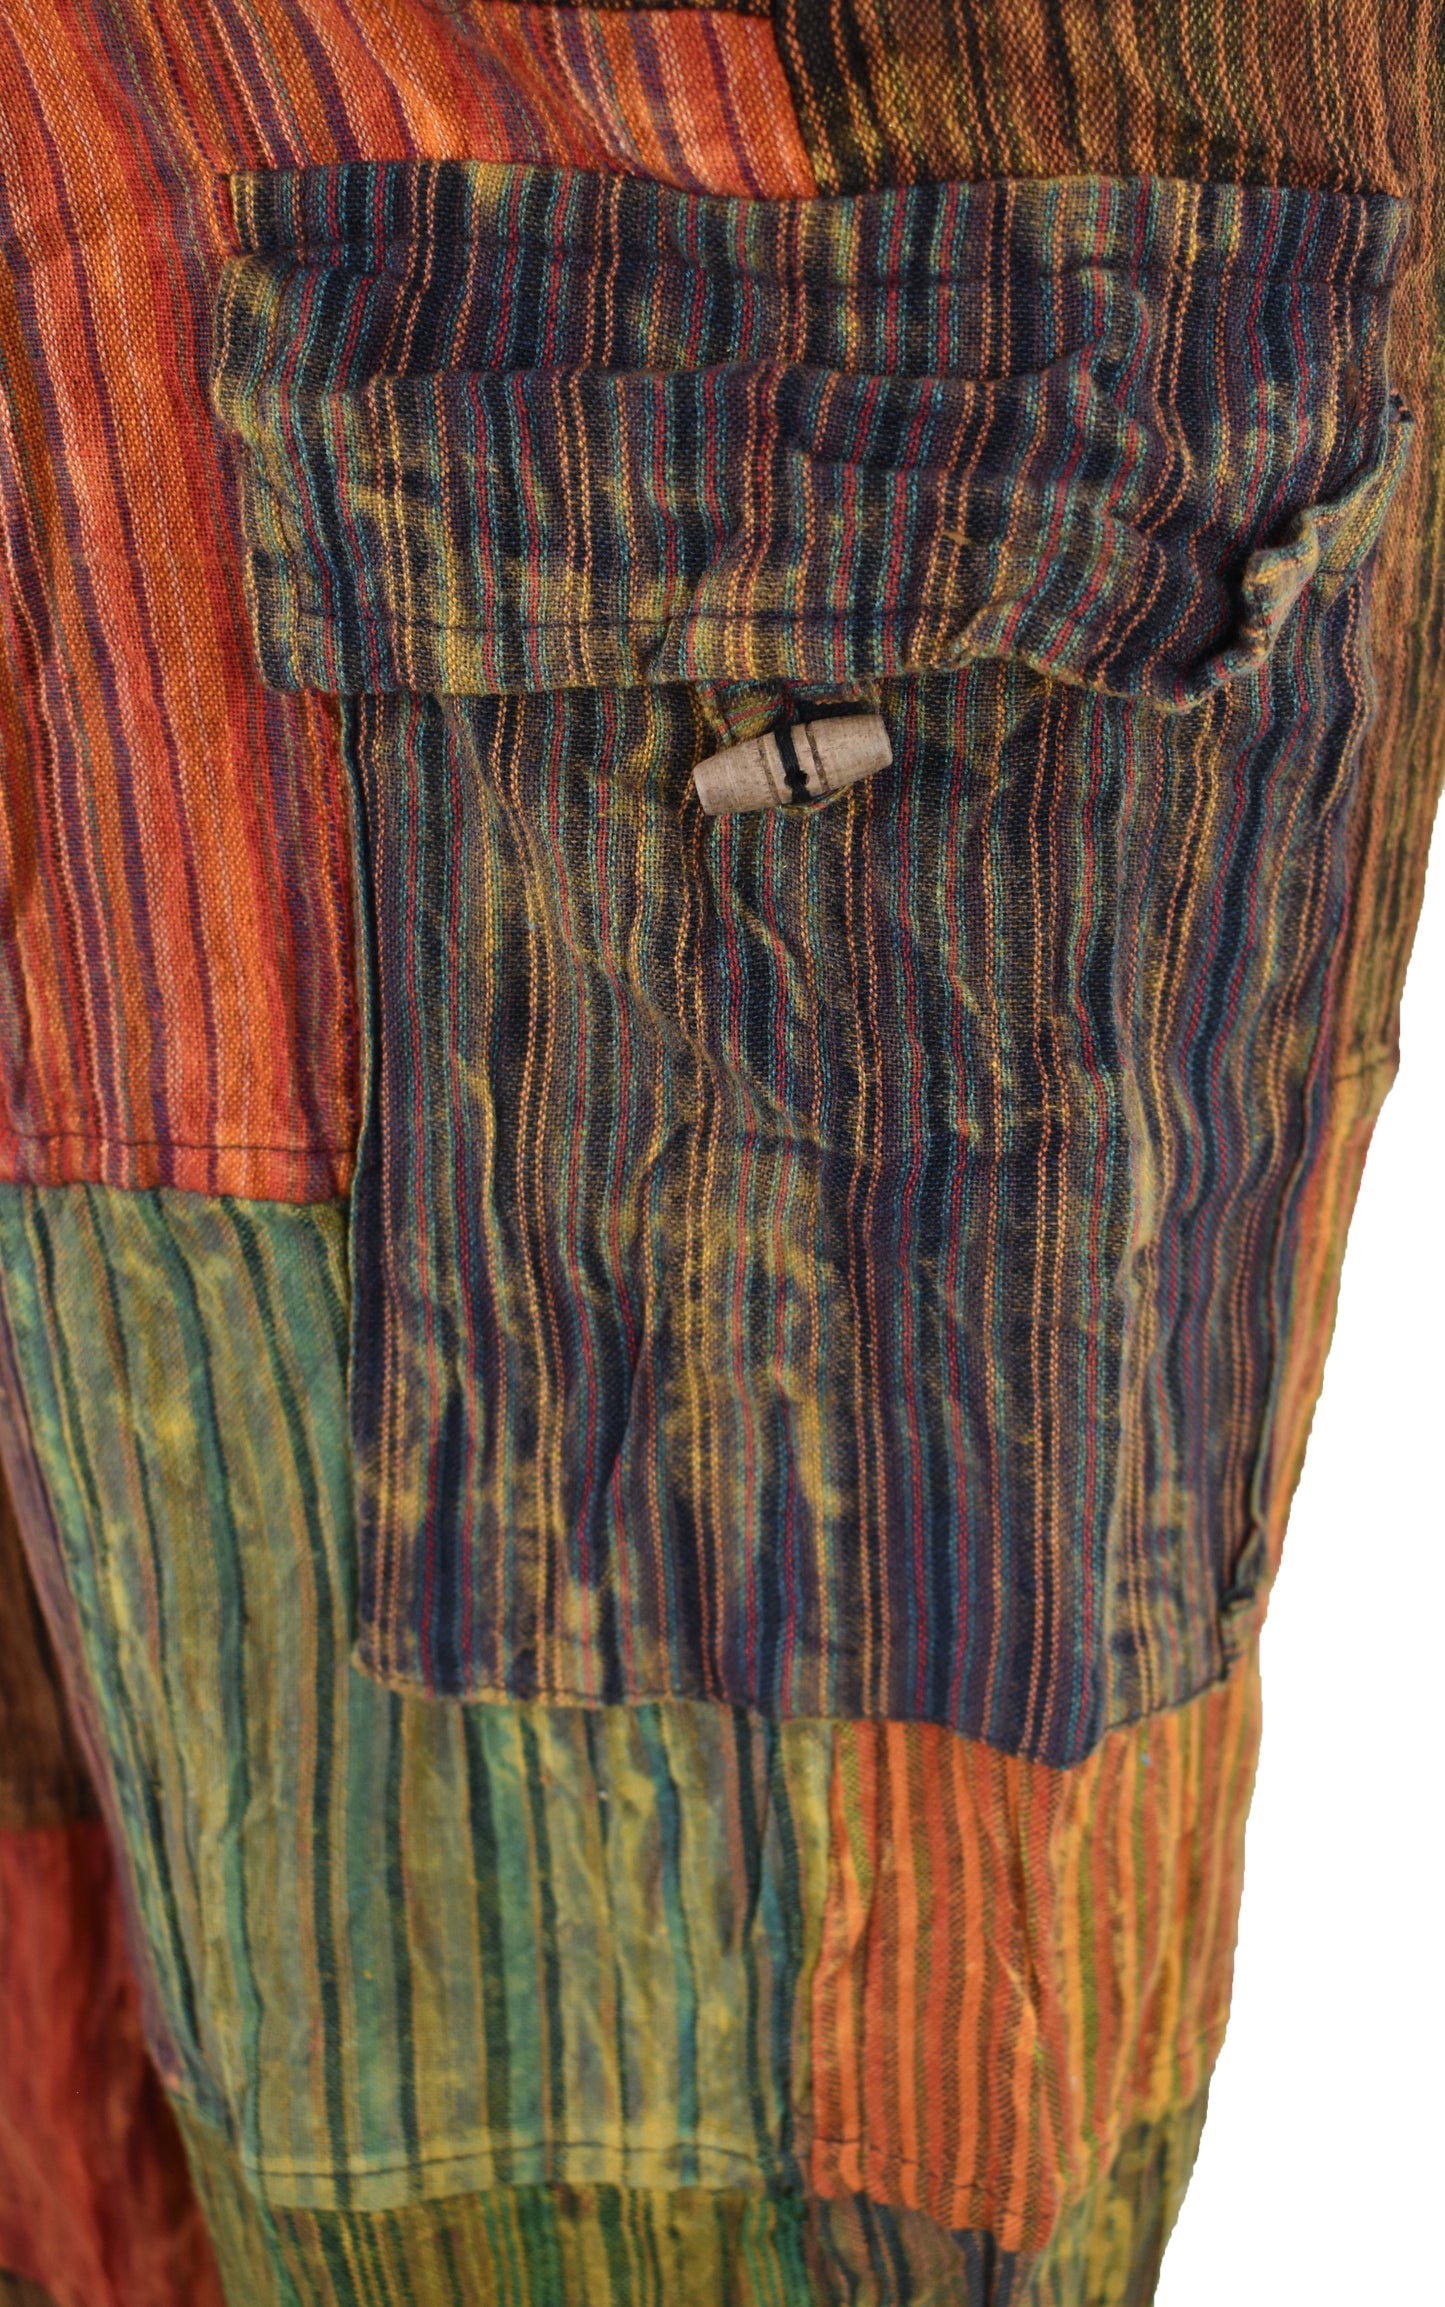 Patchwork Overdyed Trousers